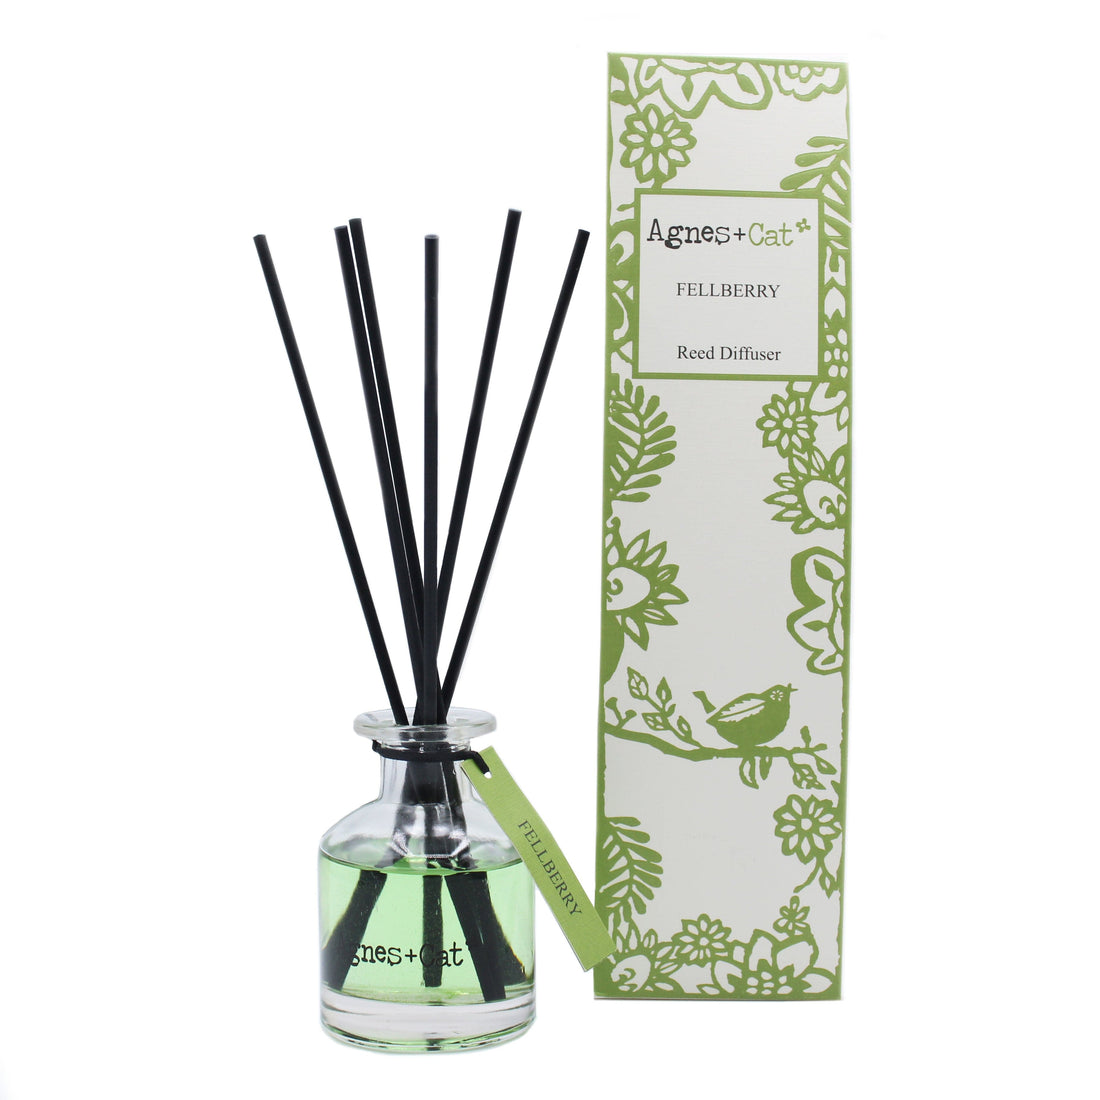 Box of 140ml Reed Diffuser - Fell Berry - best price from Maltashopper.com ACD-03DS